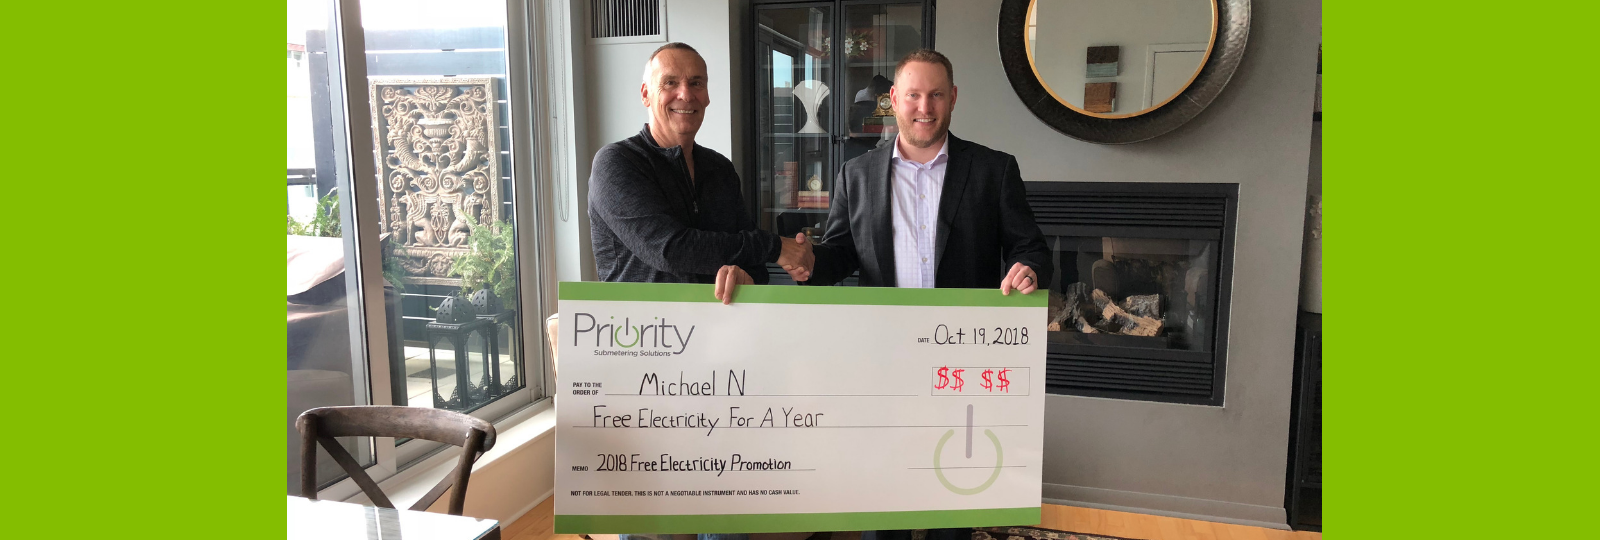 Free Electricity For a Year Winner 2018